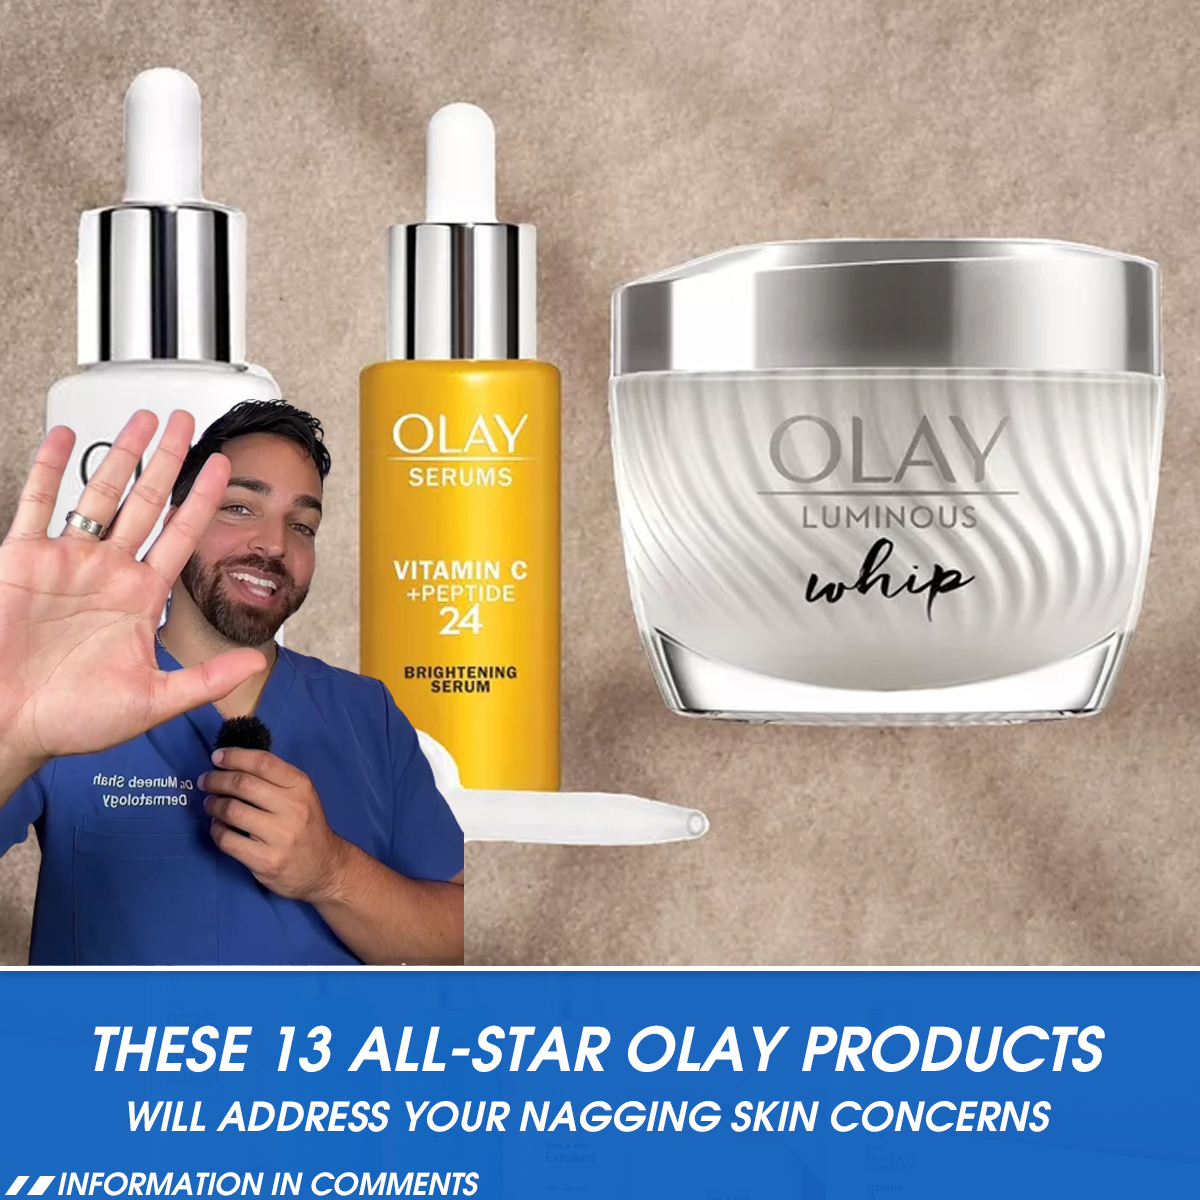 These 13 All-Star Olay Products Will Address Your Nagging Skin Concerns